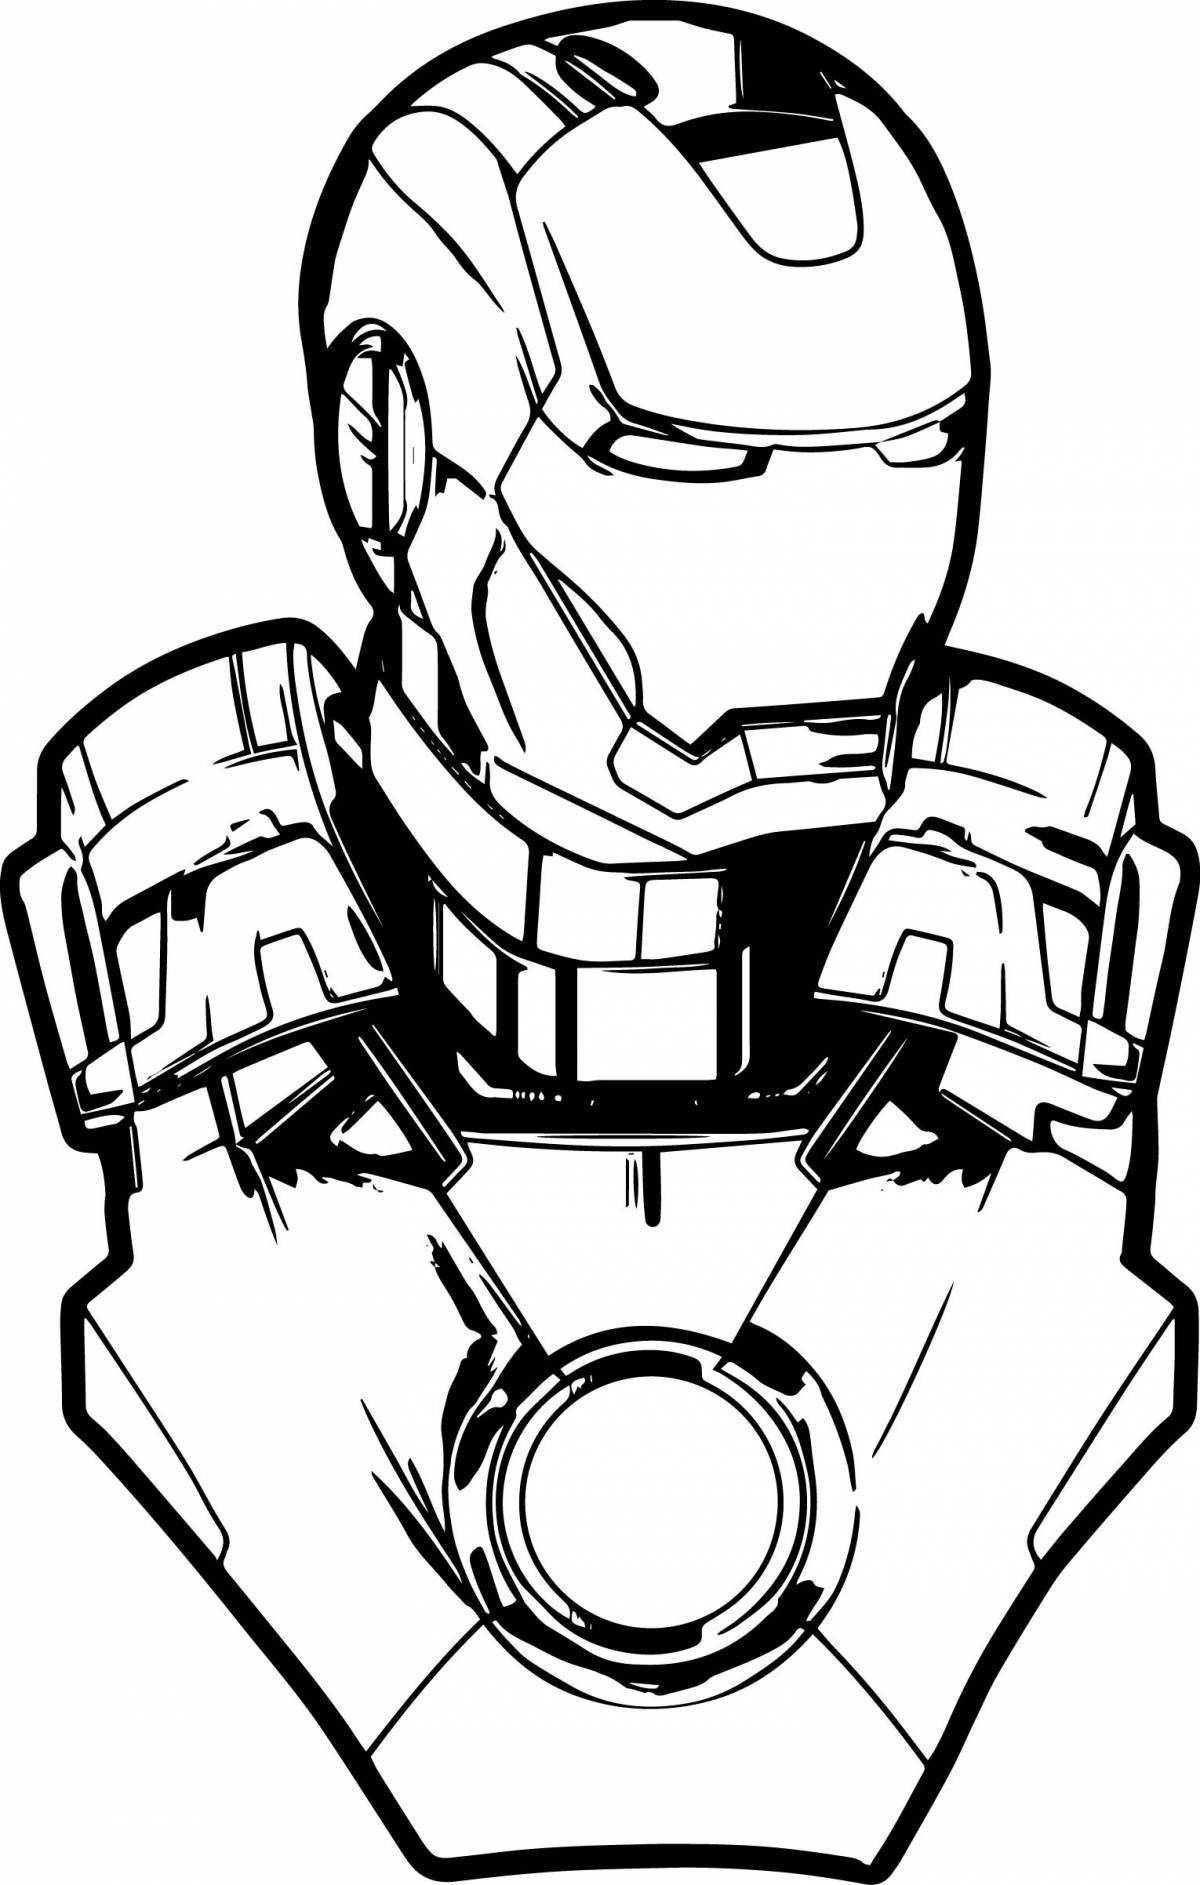 Charming iron man mask coloring page